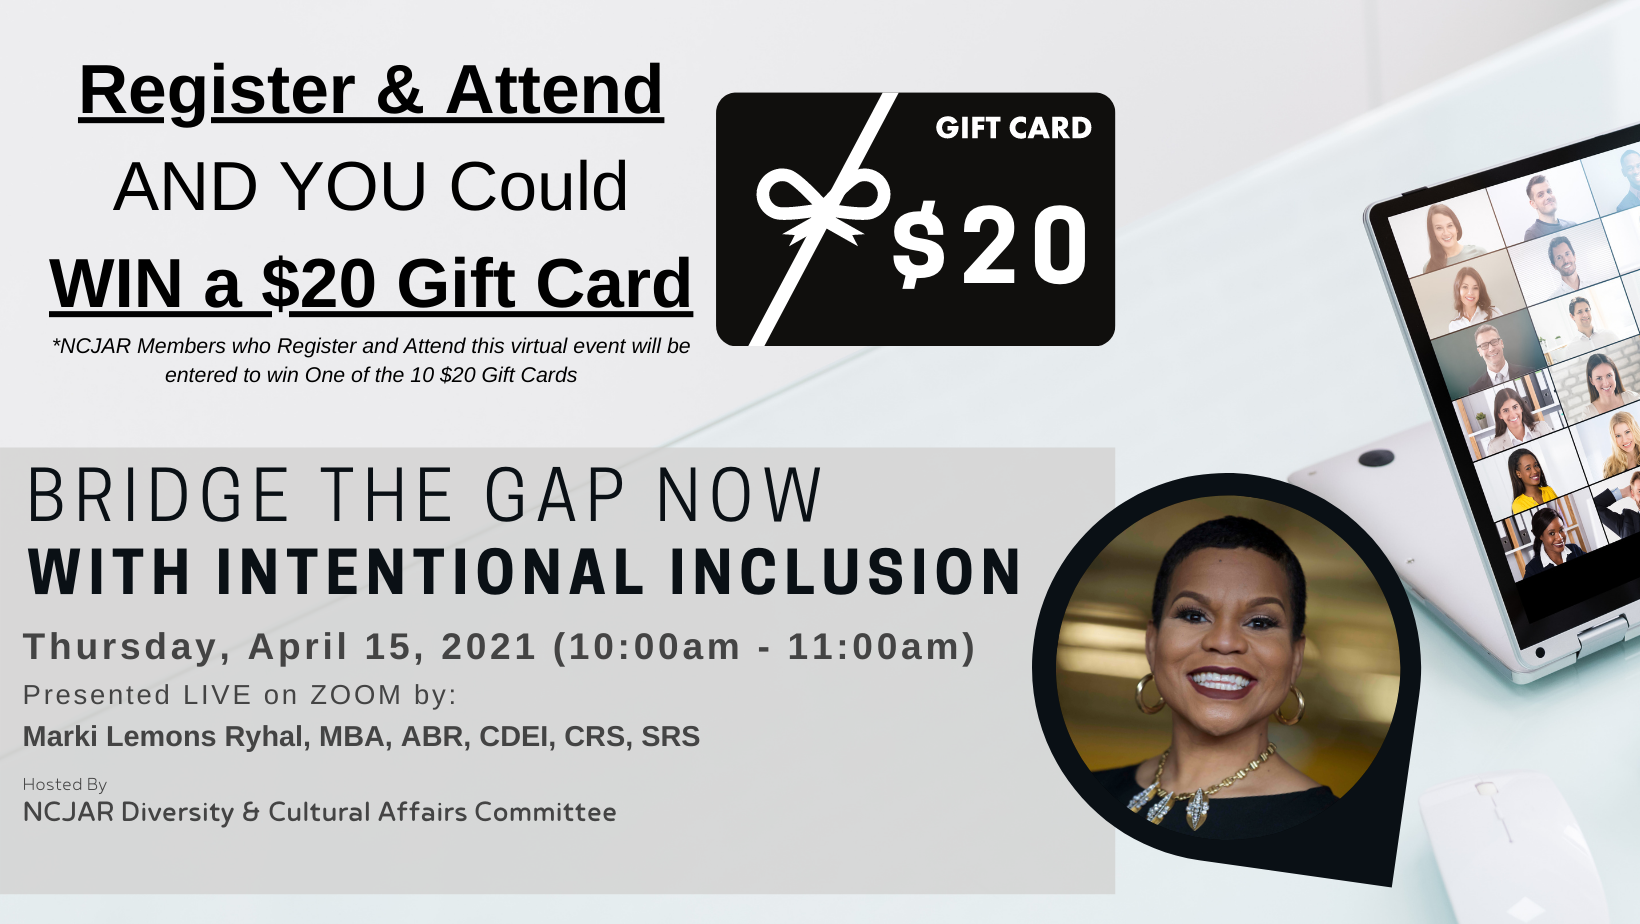 Bridge the Gap Now with Intentional Inclusion